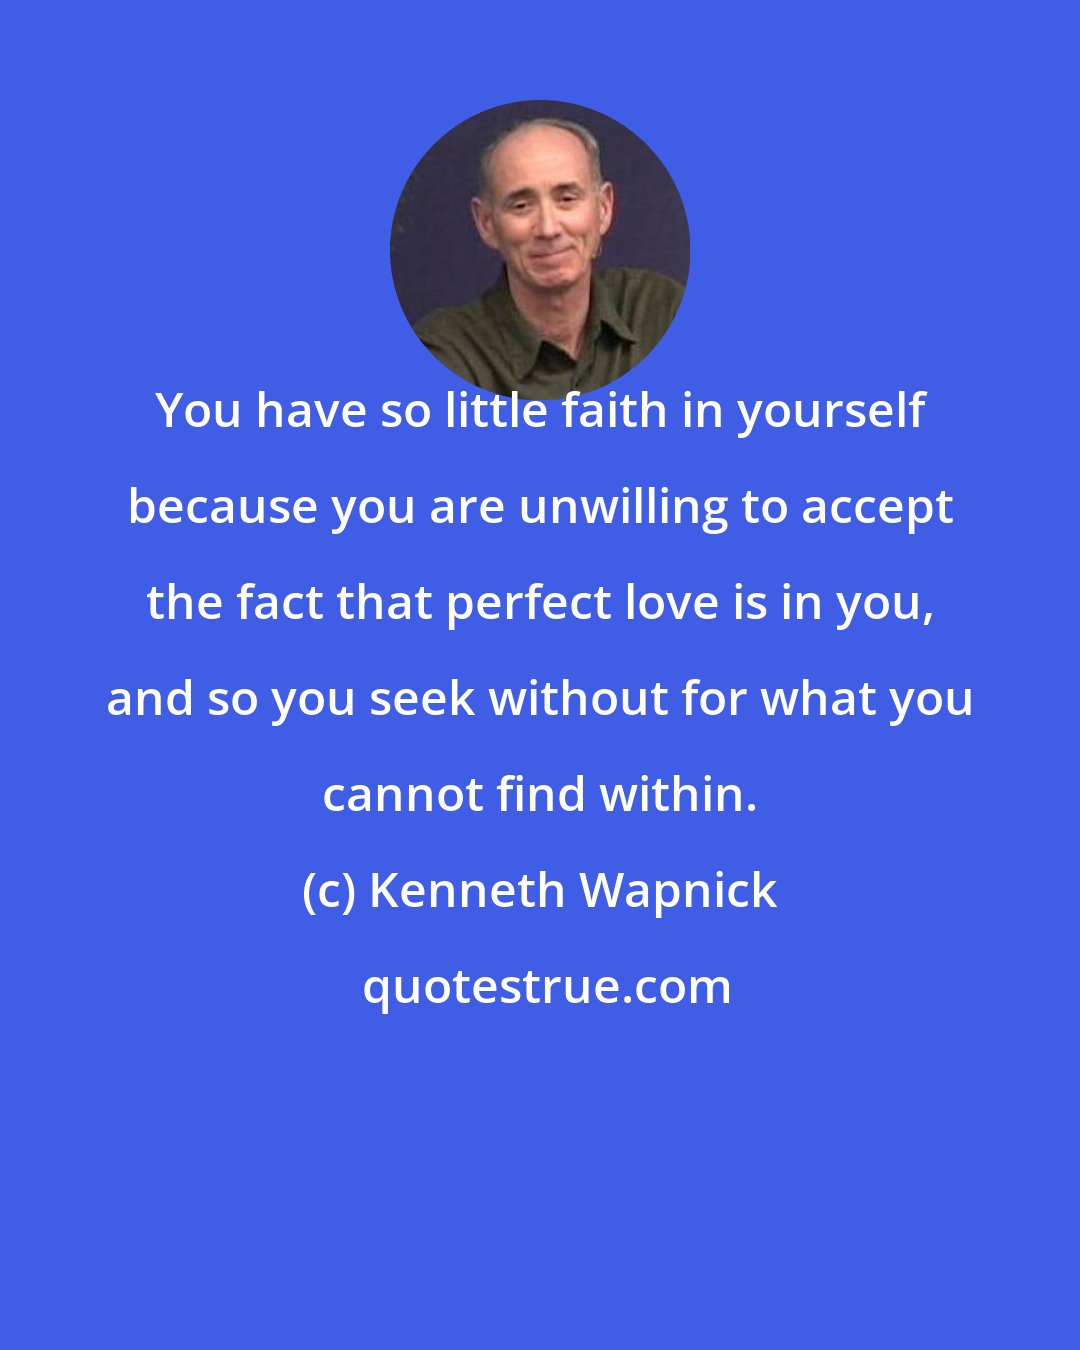 Kenneth Wapnick: You have so little faith in yourself because you are unwilling to accept the fact that perfect love is in you, and so you seek without for what you cannot find within.